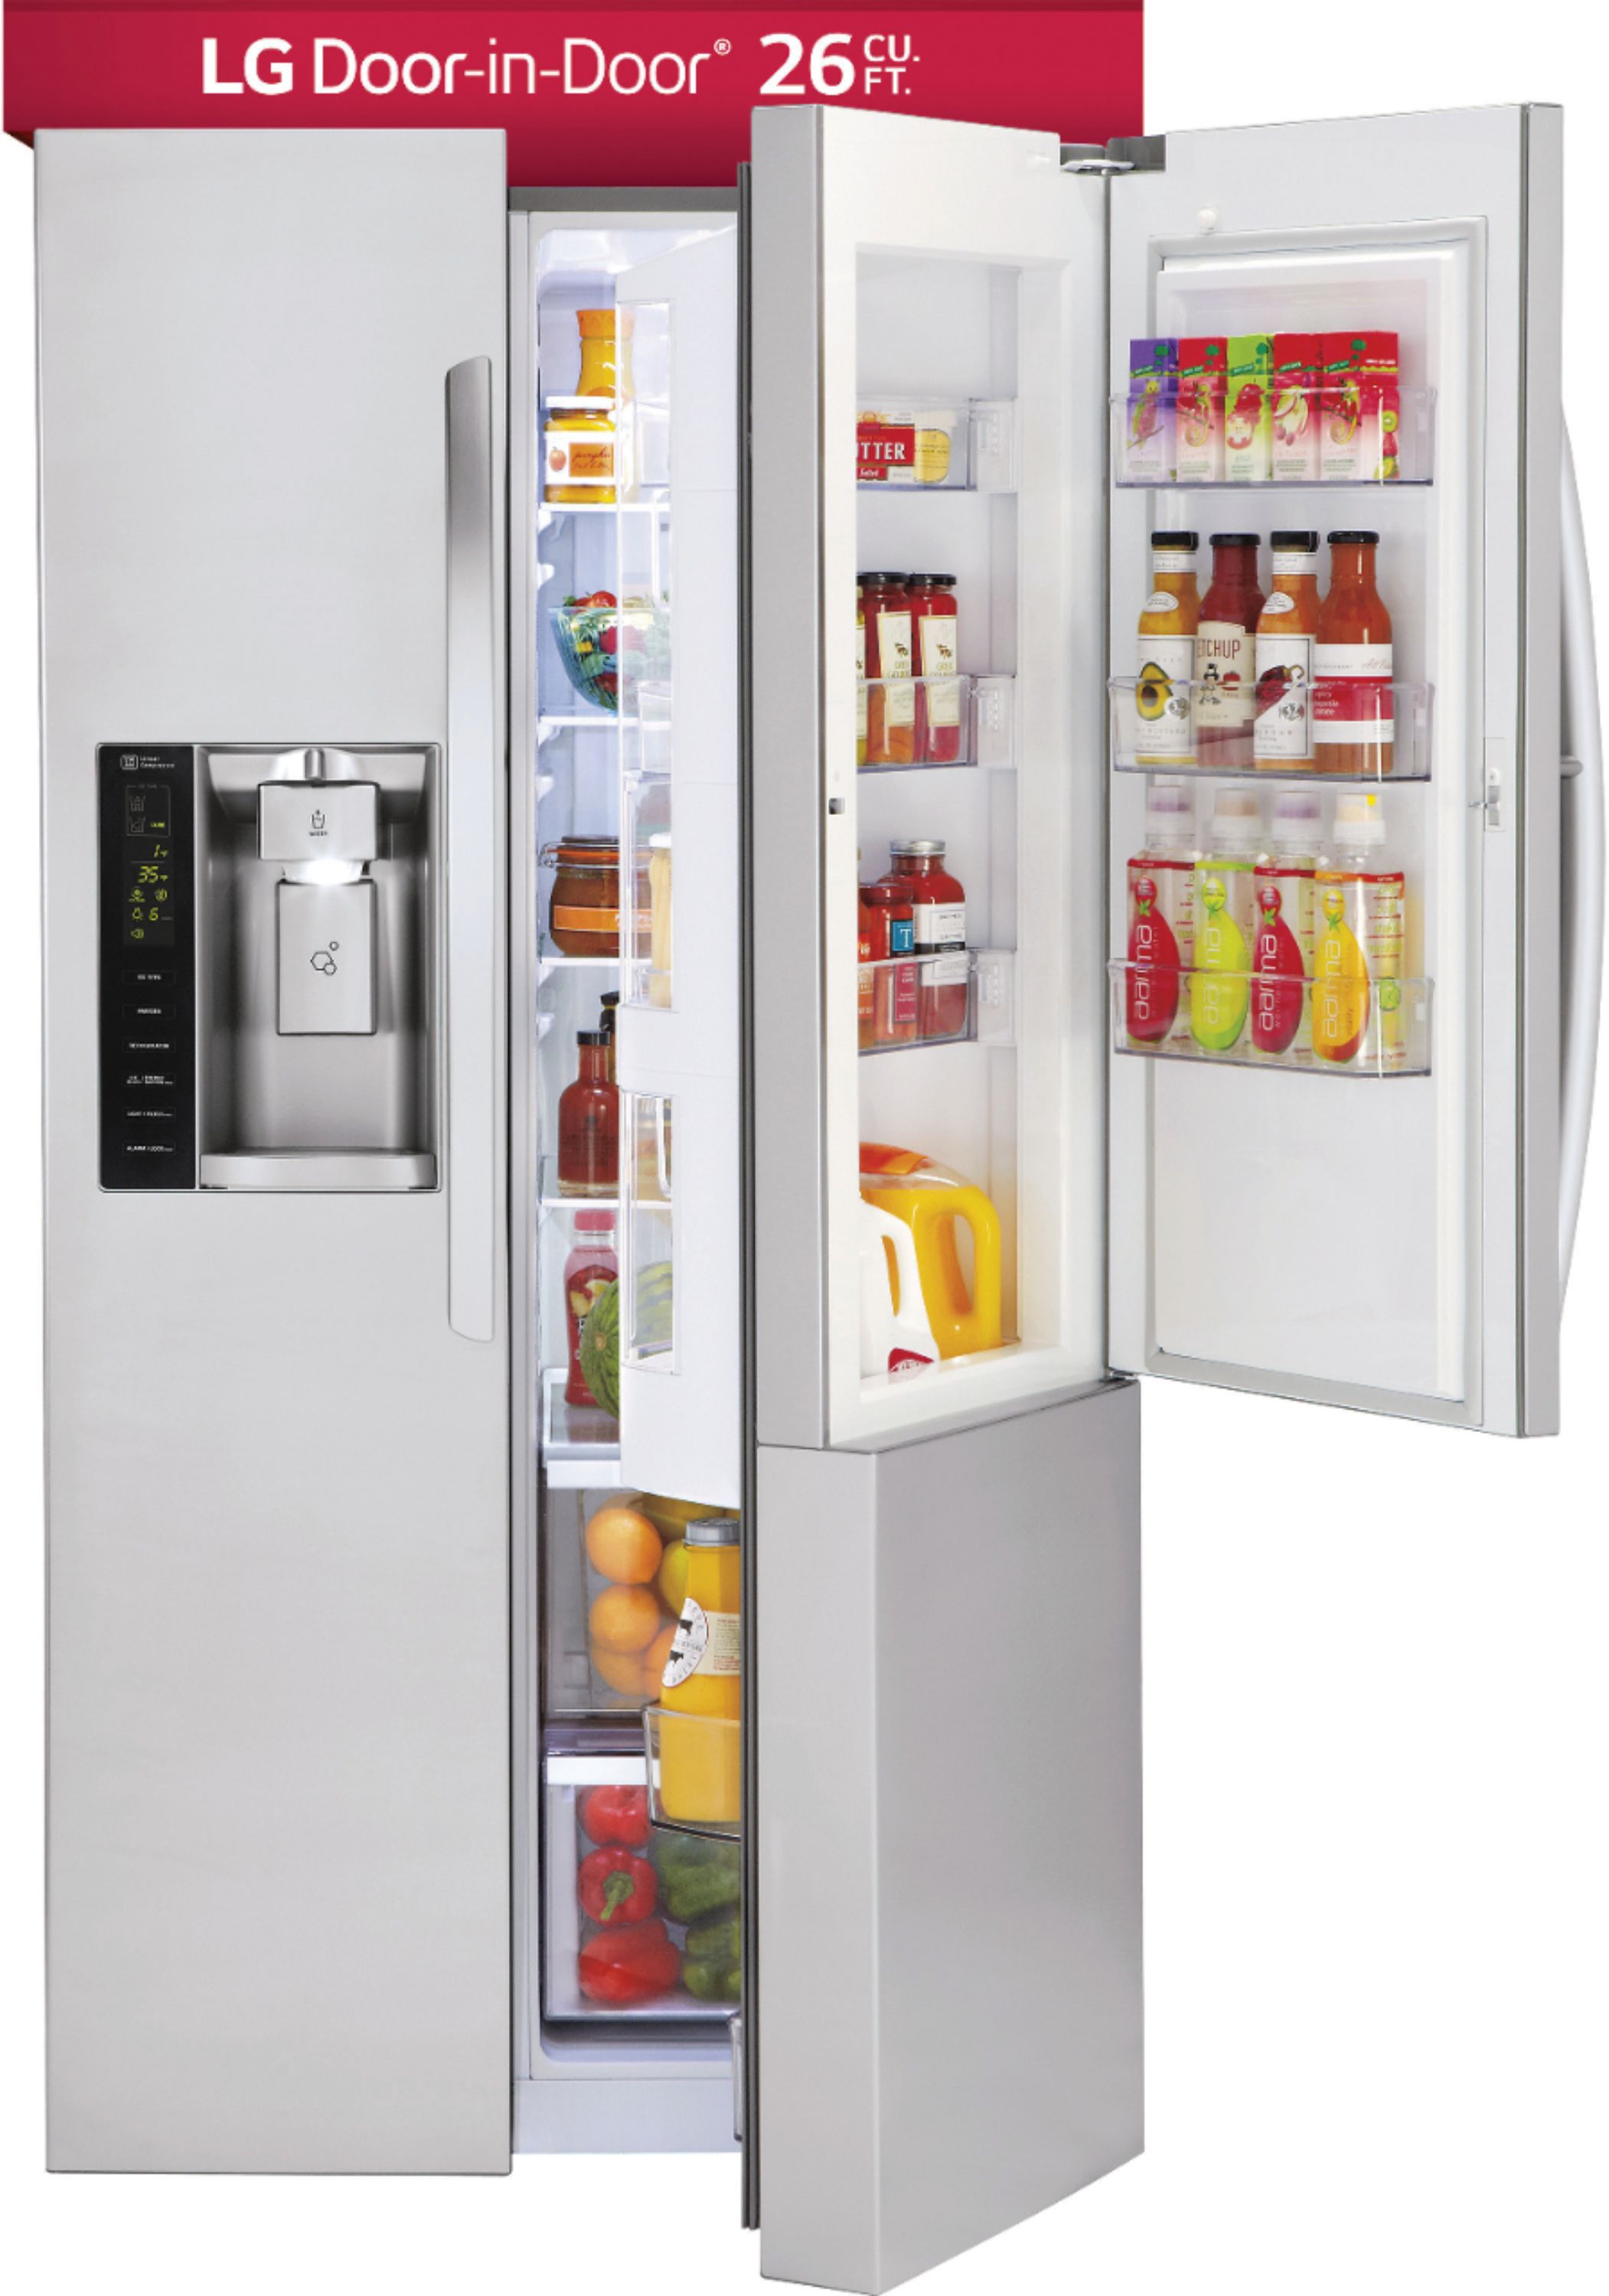 LG 36-inch, 26.1 cu. ft. Freestanding Side-by-Side Refrigerator with D